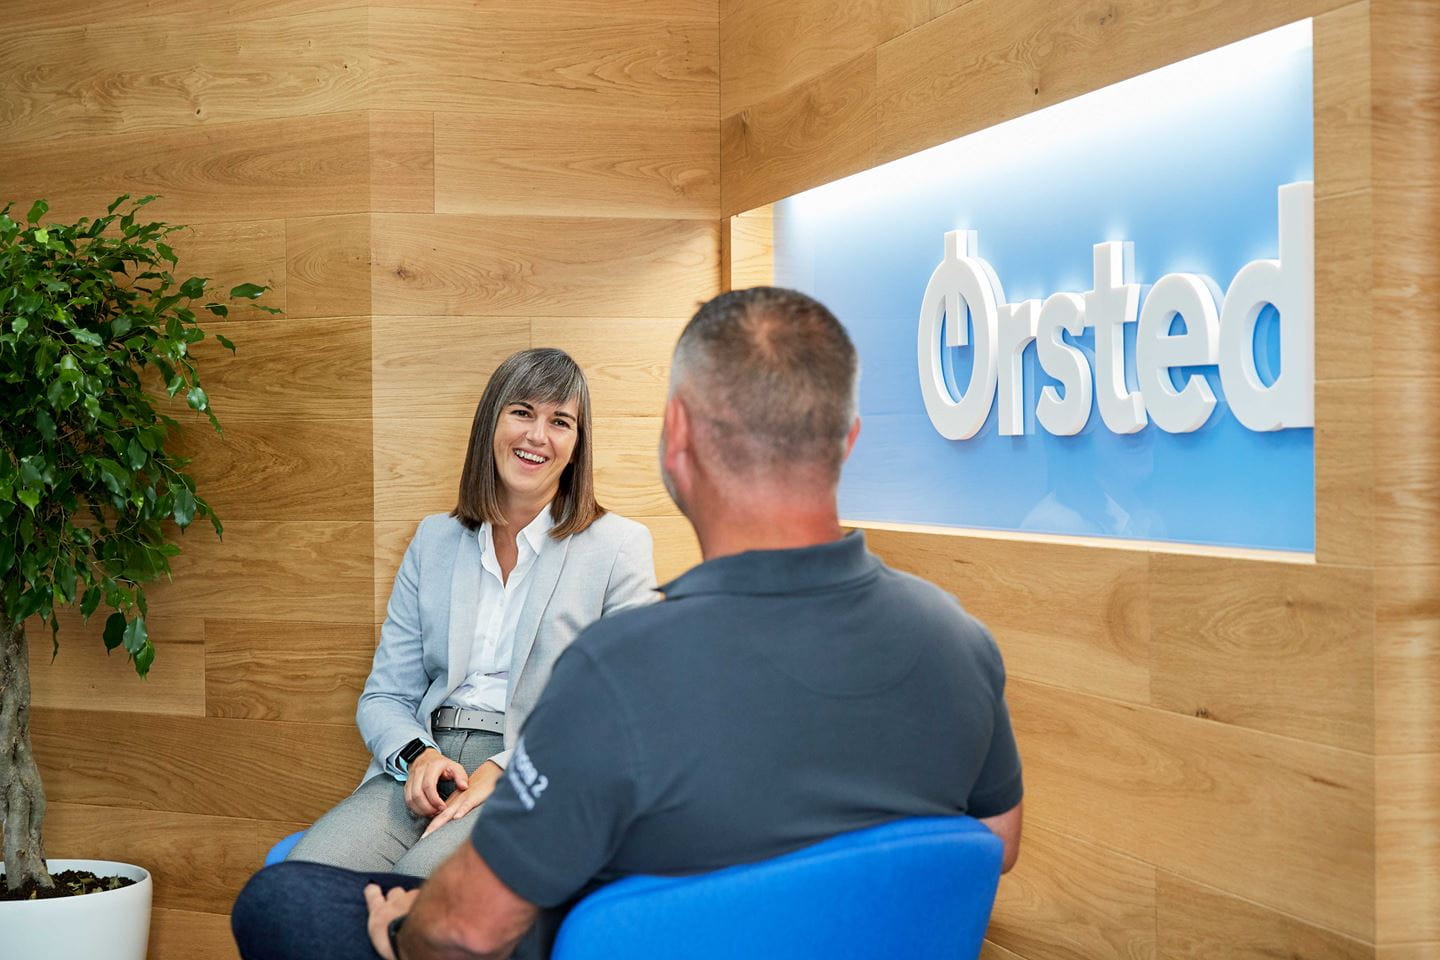 Two employees sitting in front of an Ørsted logo hanging on the wall.